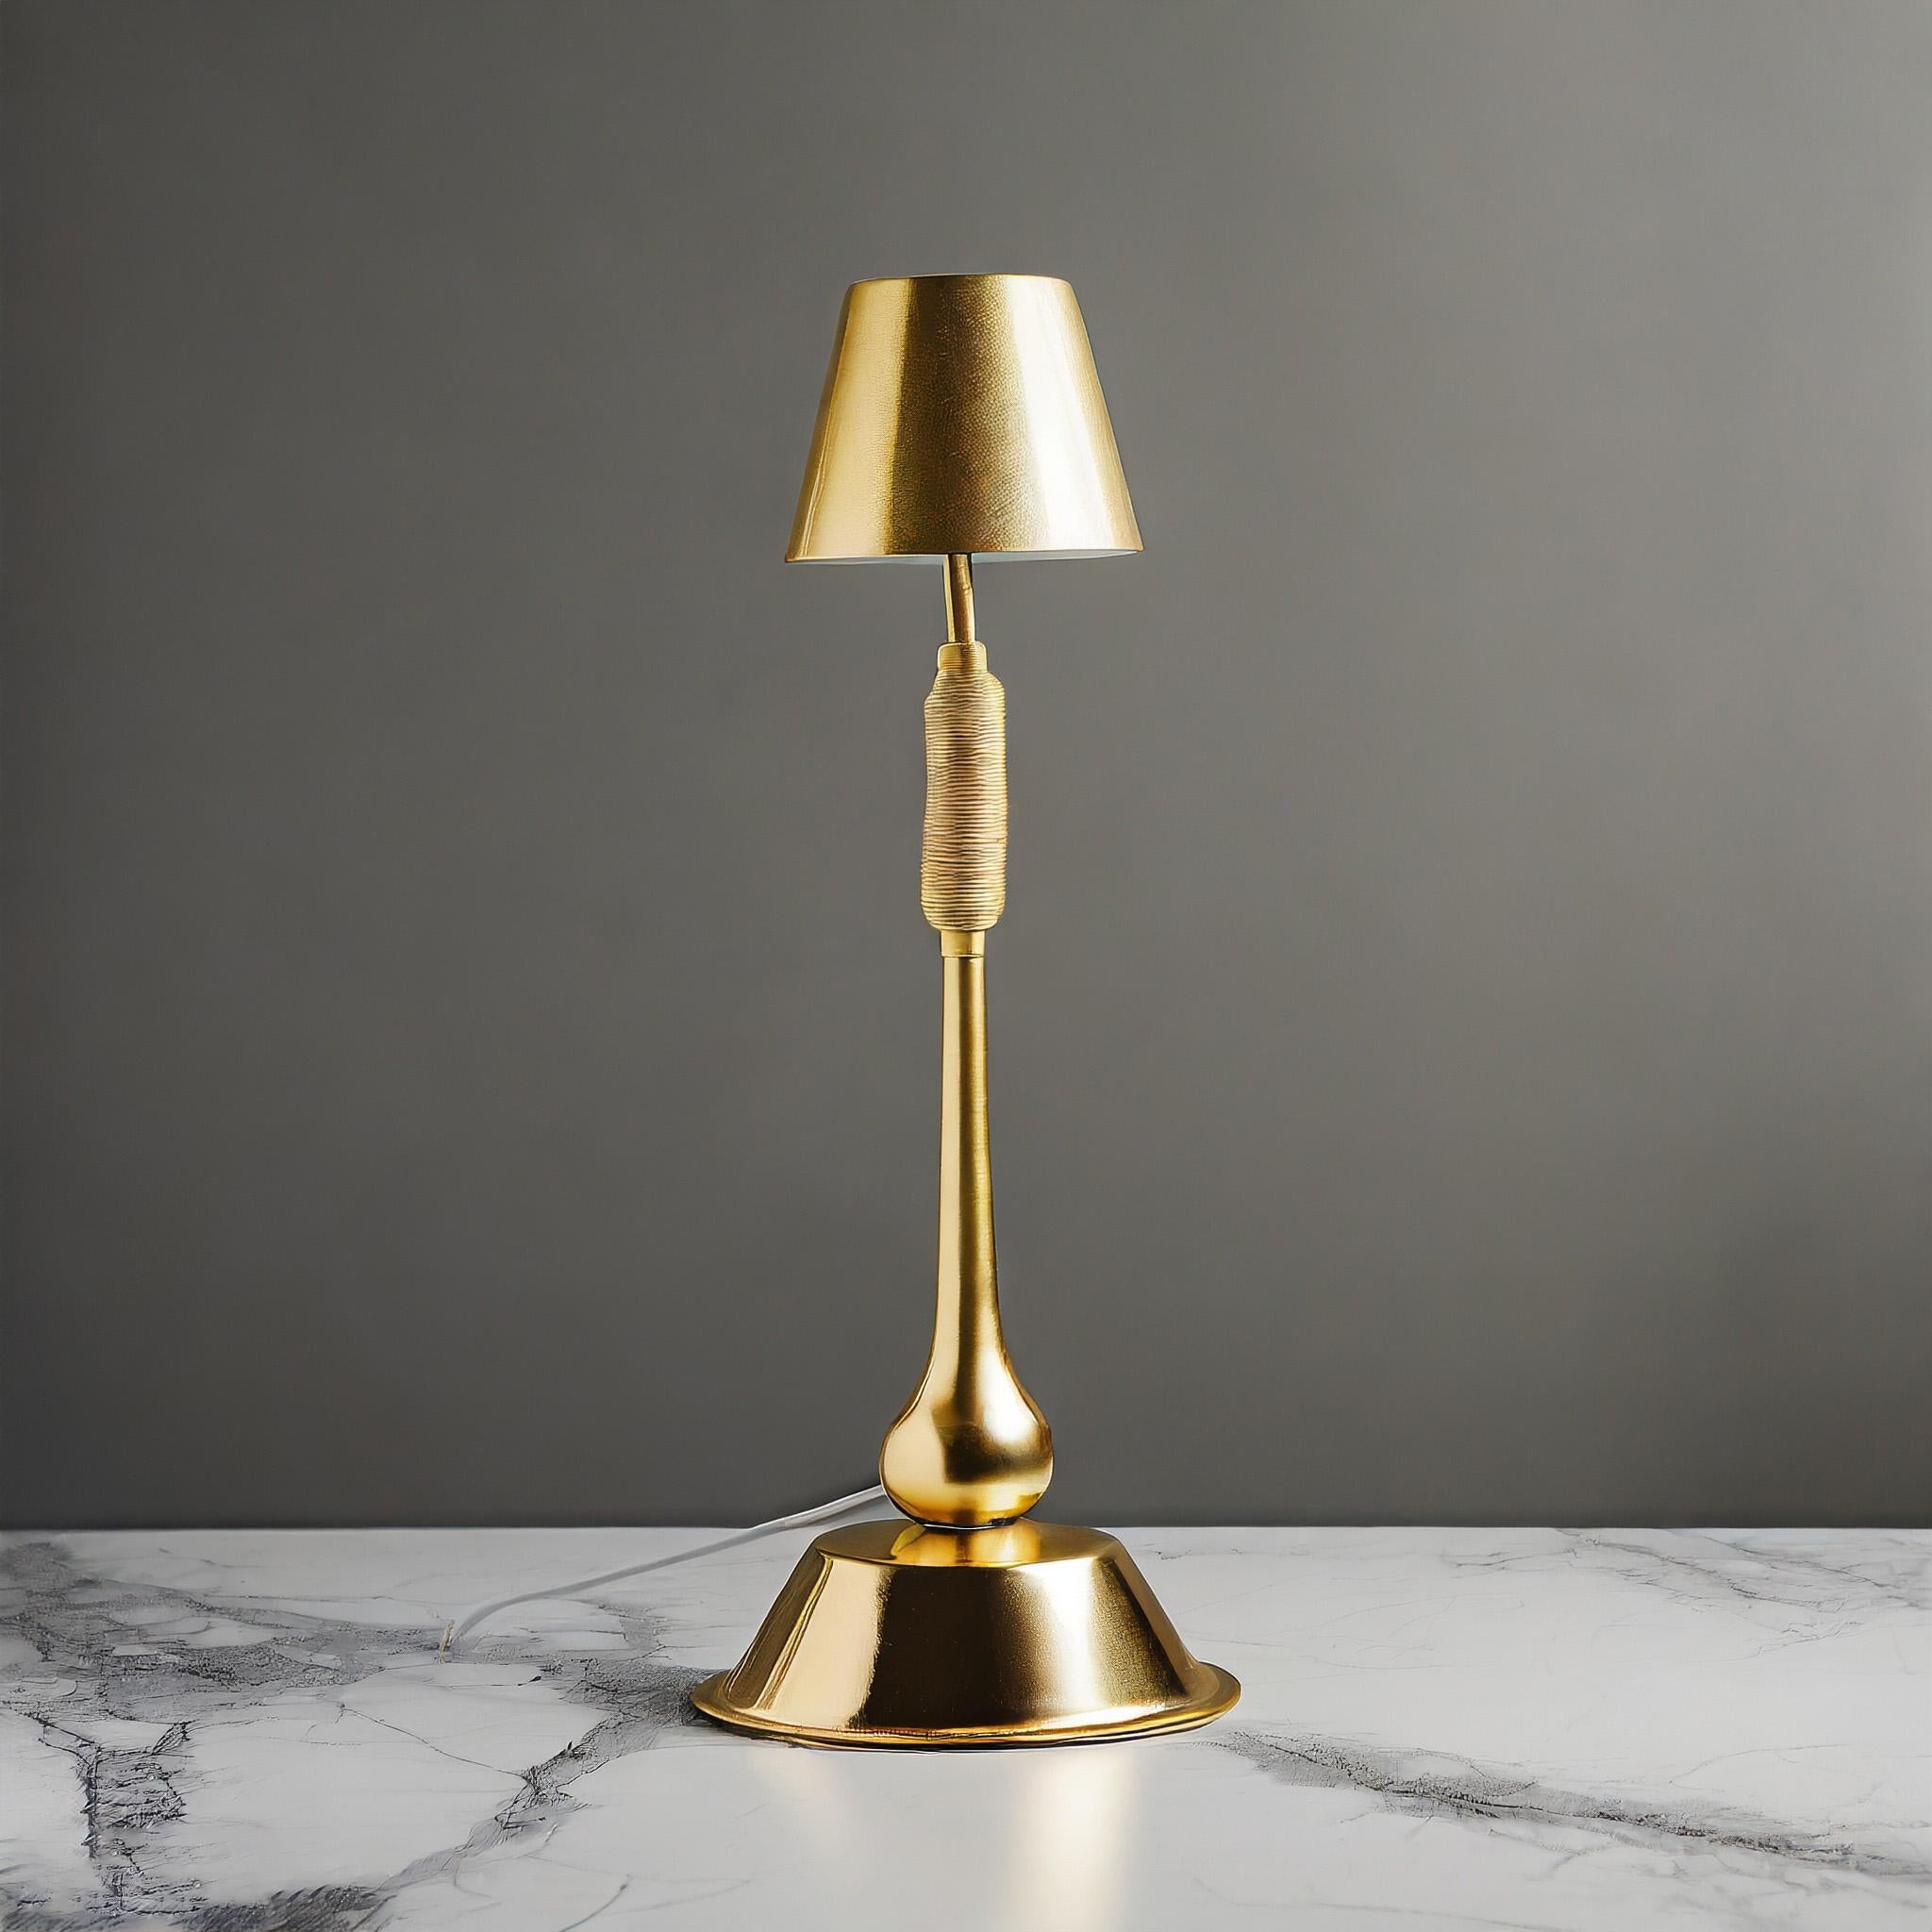 Introducing the 'Saya' Golden Brass Desk Lamp, a masterpiece of elegance and warmth.

This lamp boasts a finely machined turned base with a brass wire coil detail, topped by pressed brass cones for both the base and lampshade. Its soft aesthetic